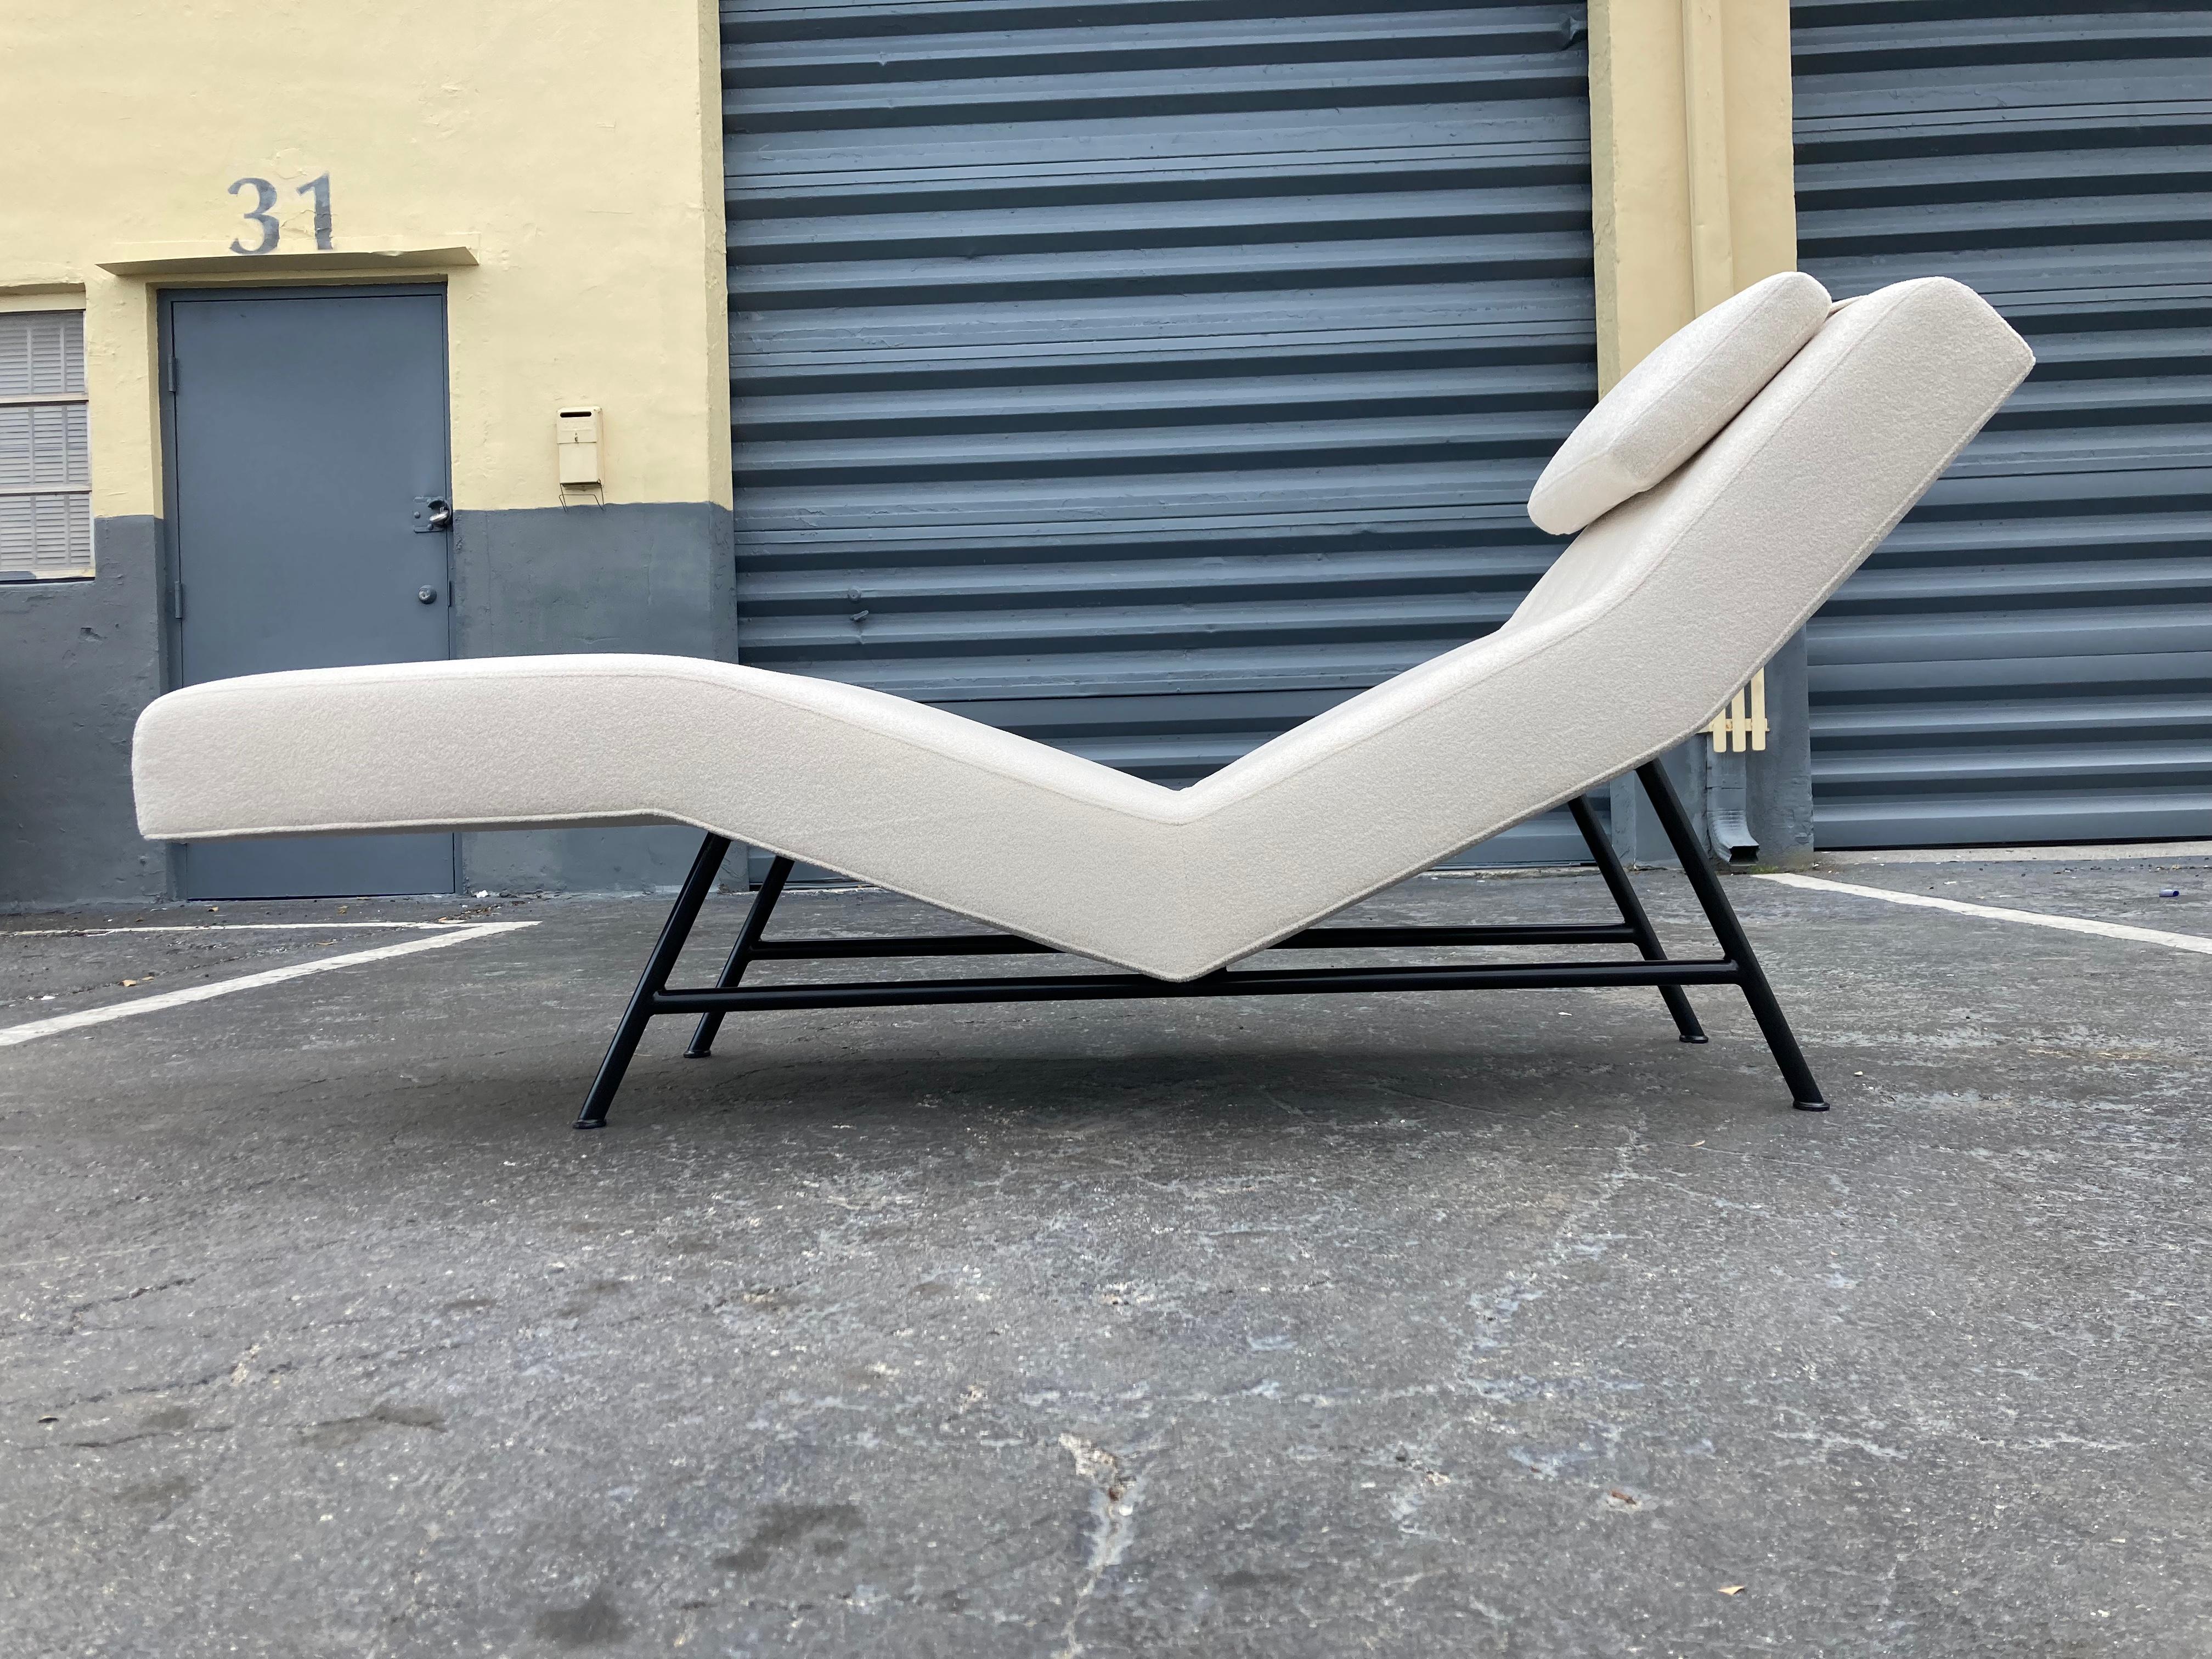 Original Milo Baughman Chaise for Thayer Coggin, recently reupholstered in beautiful ivory fabric, base has a black finish. Ready for a new home.